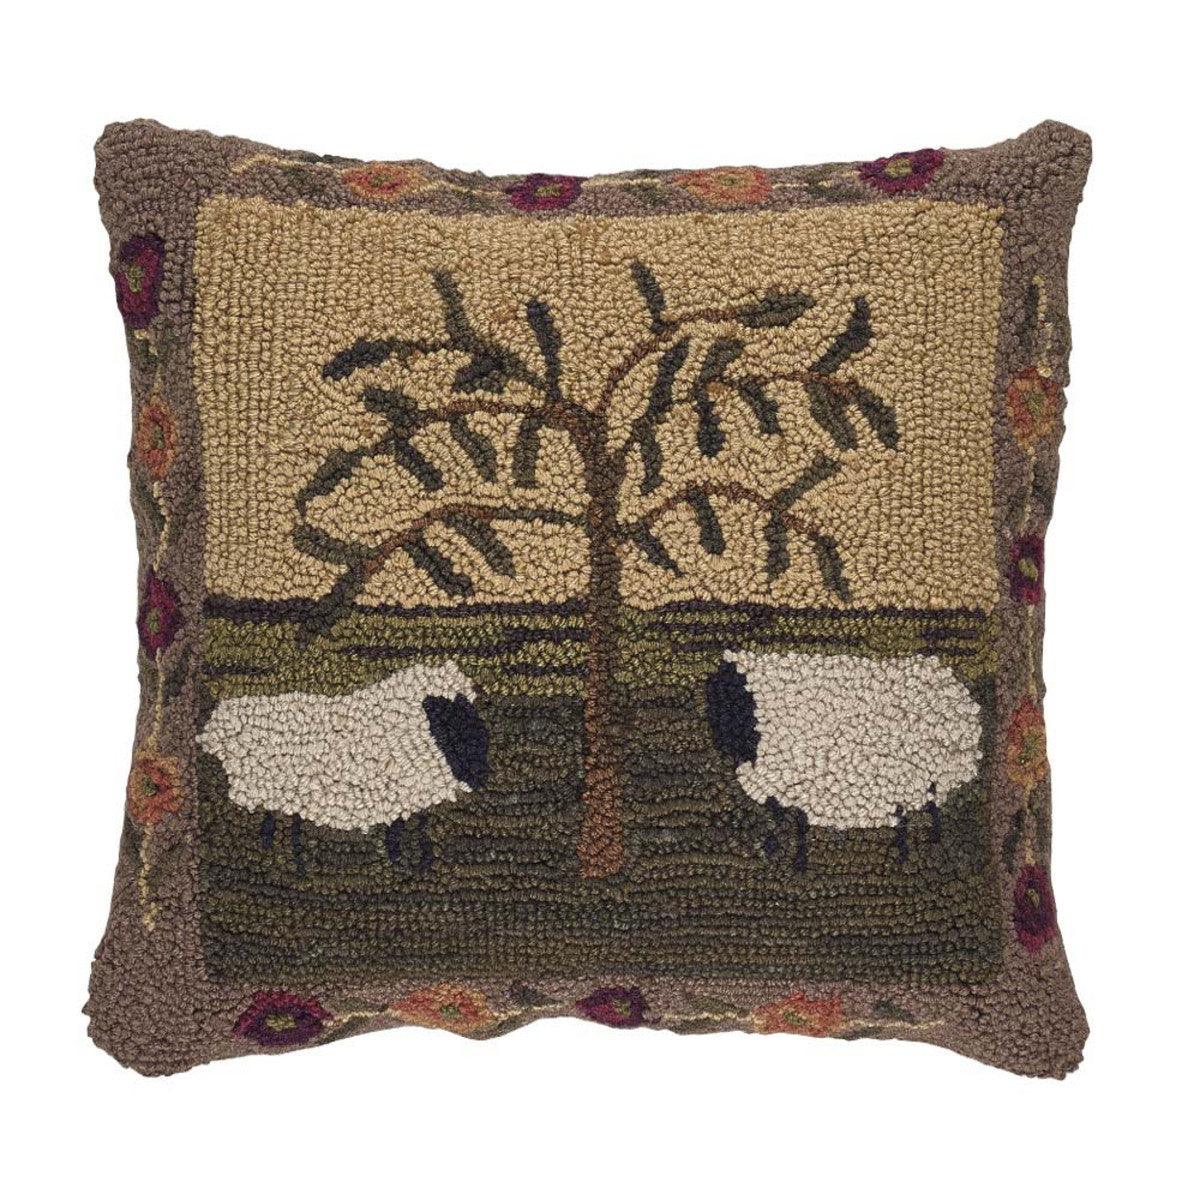 Willow & Sheep Hooked Pillow Set Down Feather Fill 18"x18" - Park Designs - The Fox Decor